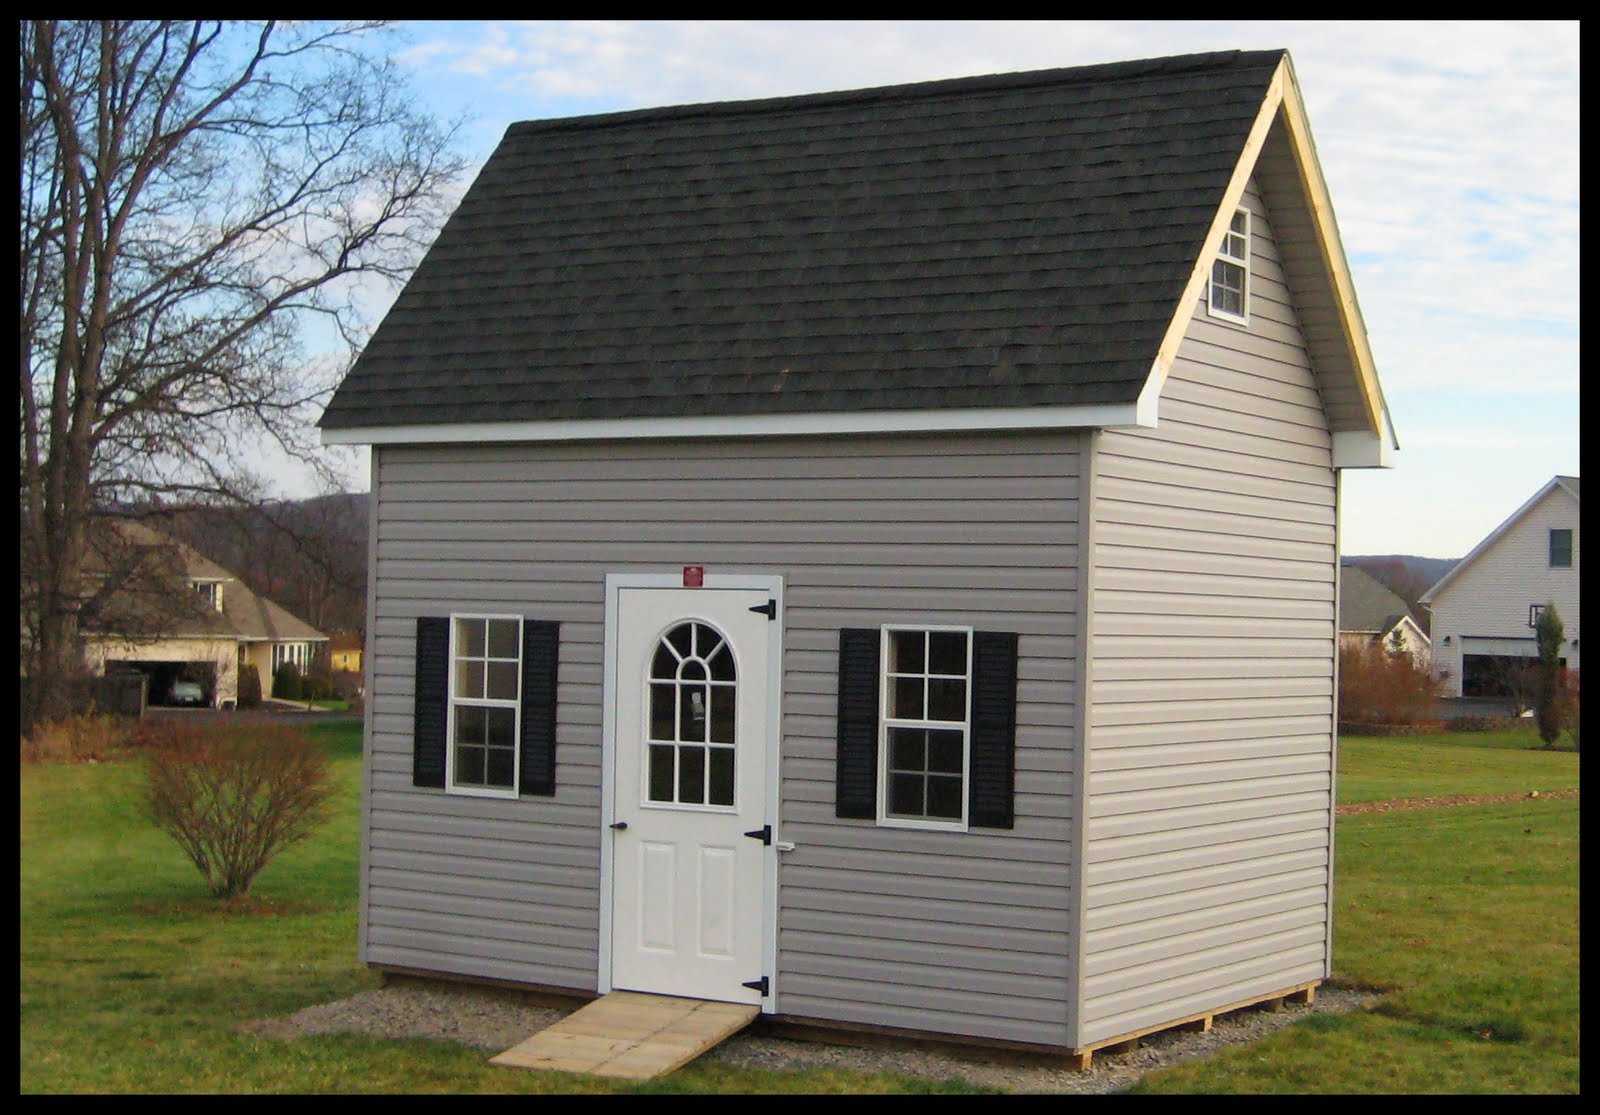 15 Best Two Story Shed Designs - Home Plans & Blueprints